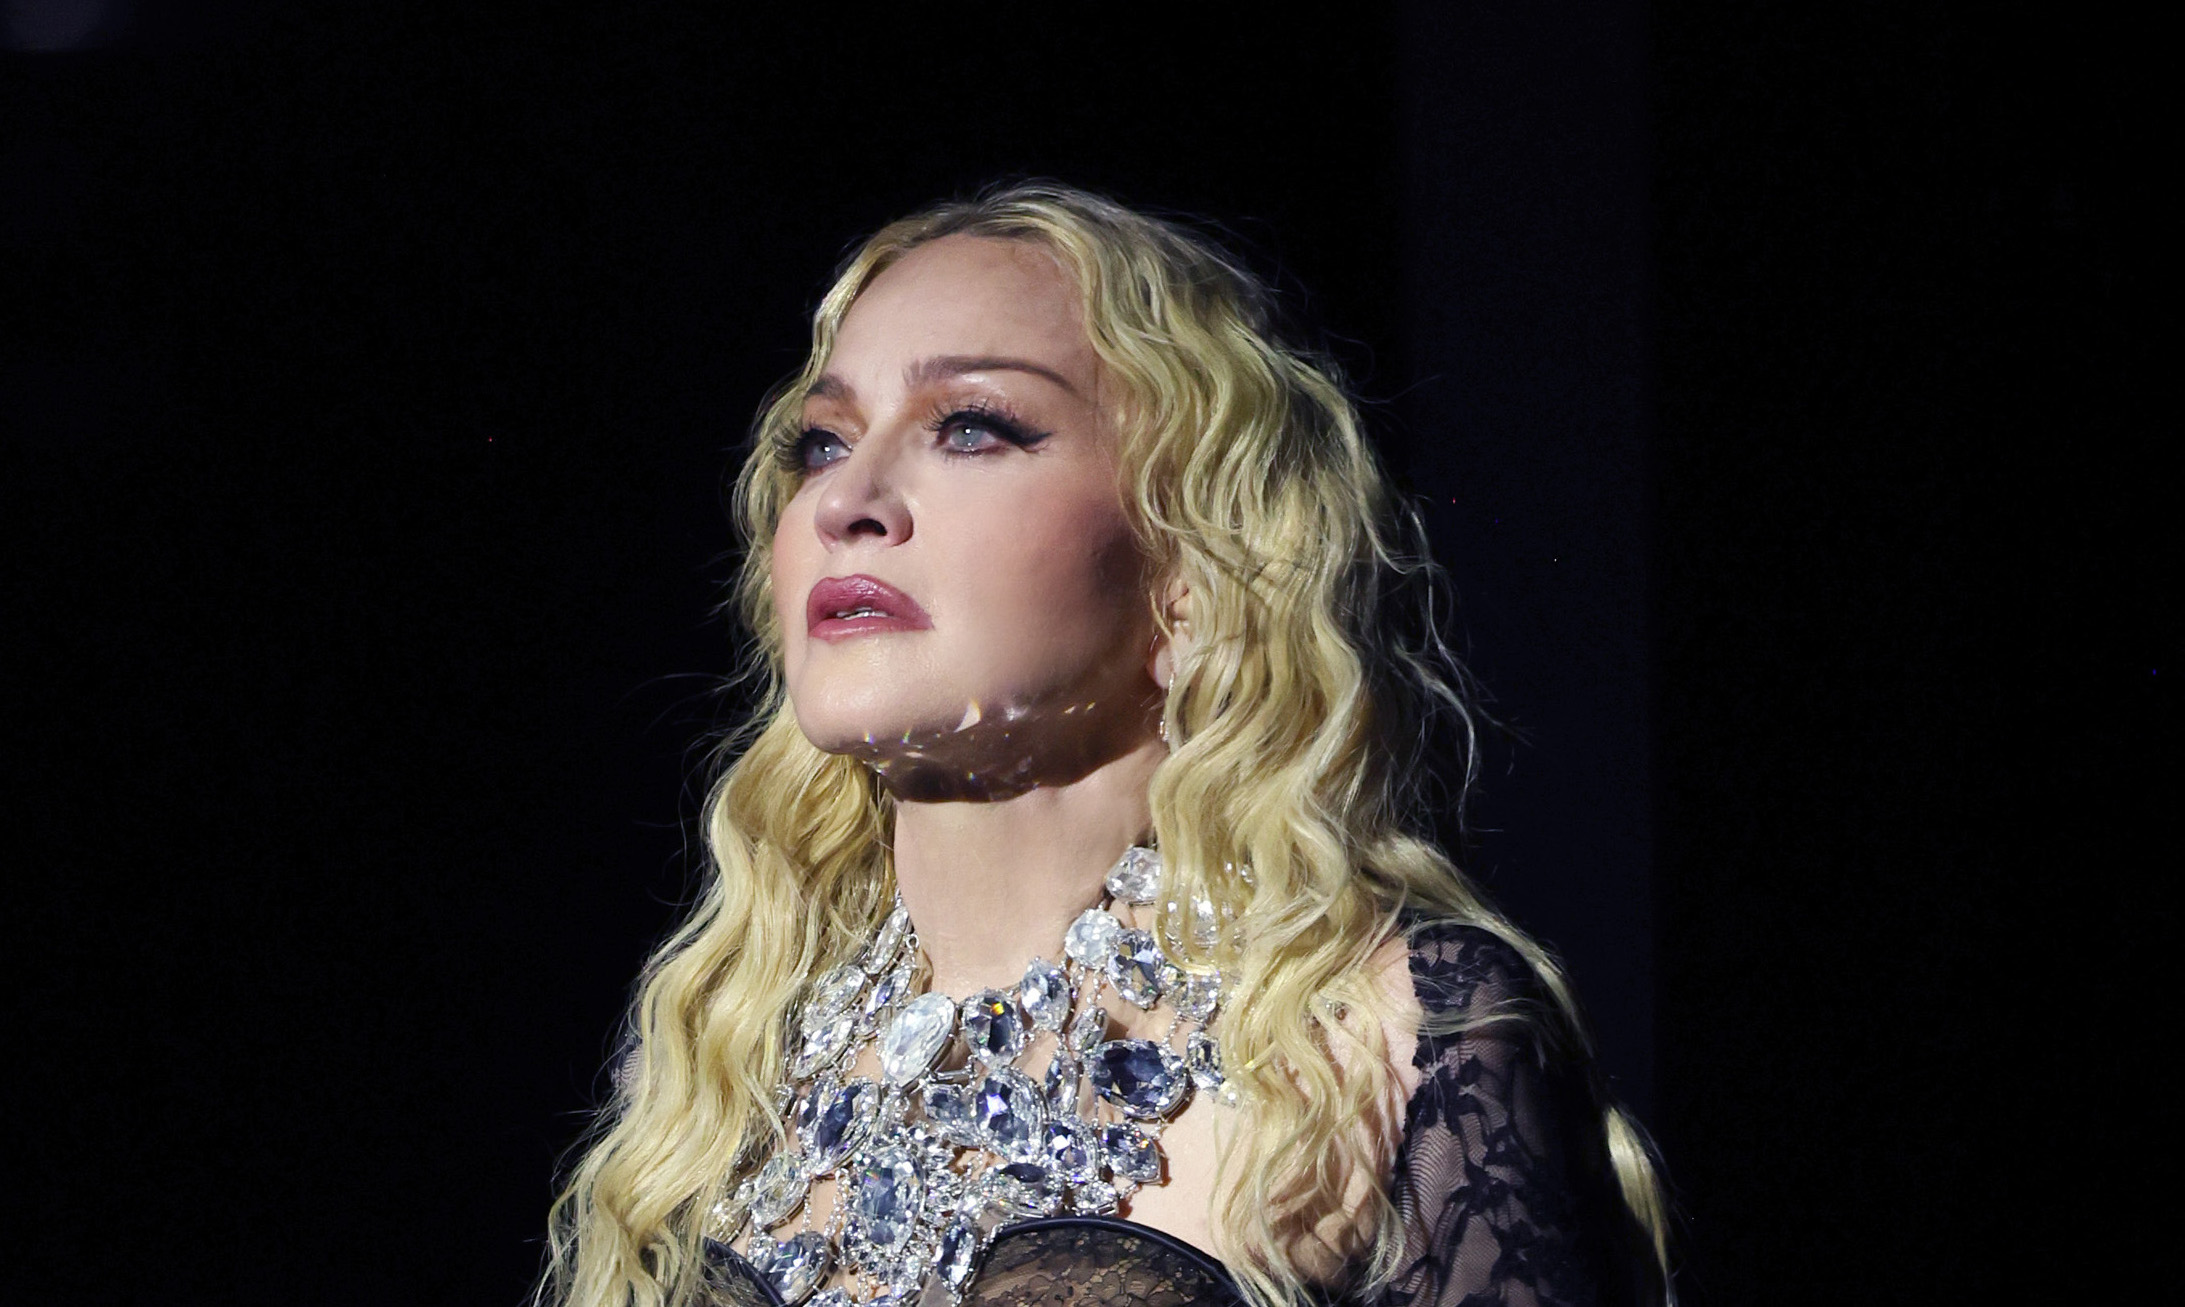 Madonna claims divine encounter during near-death moment